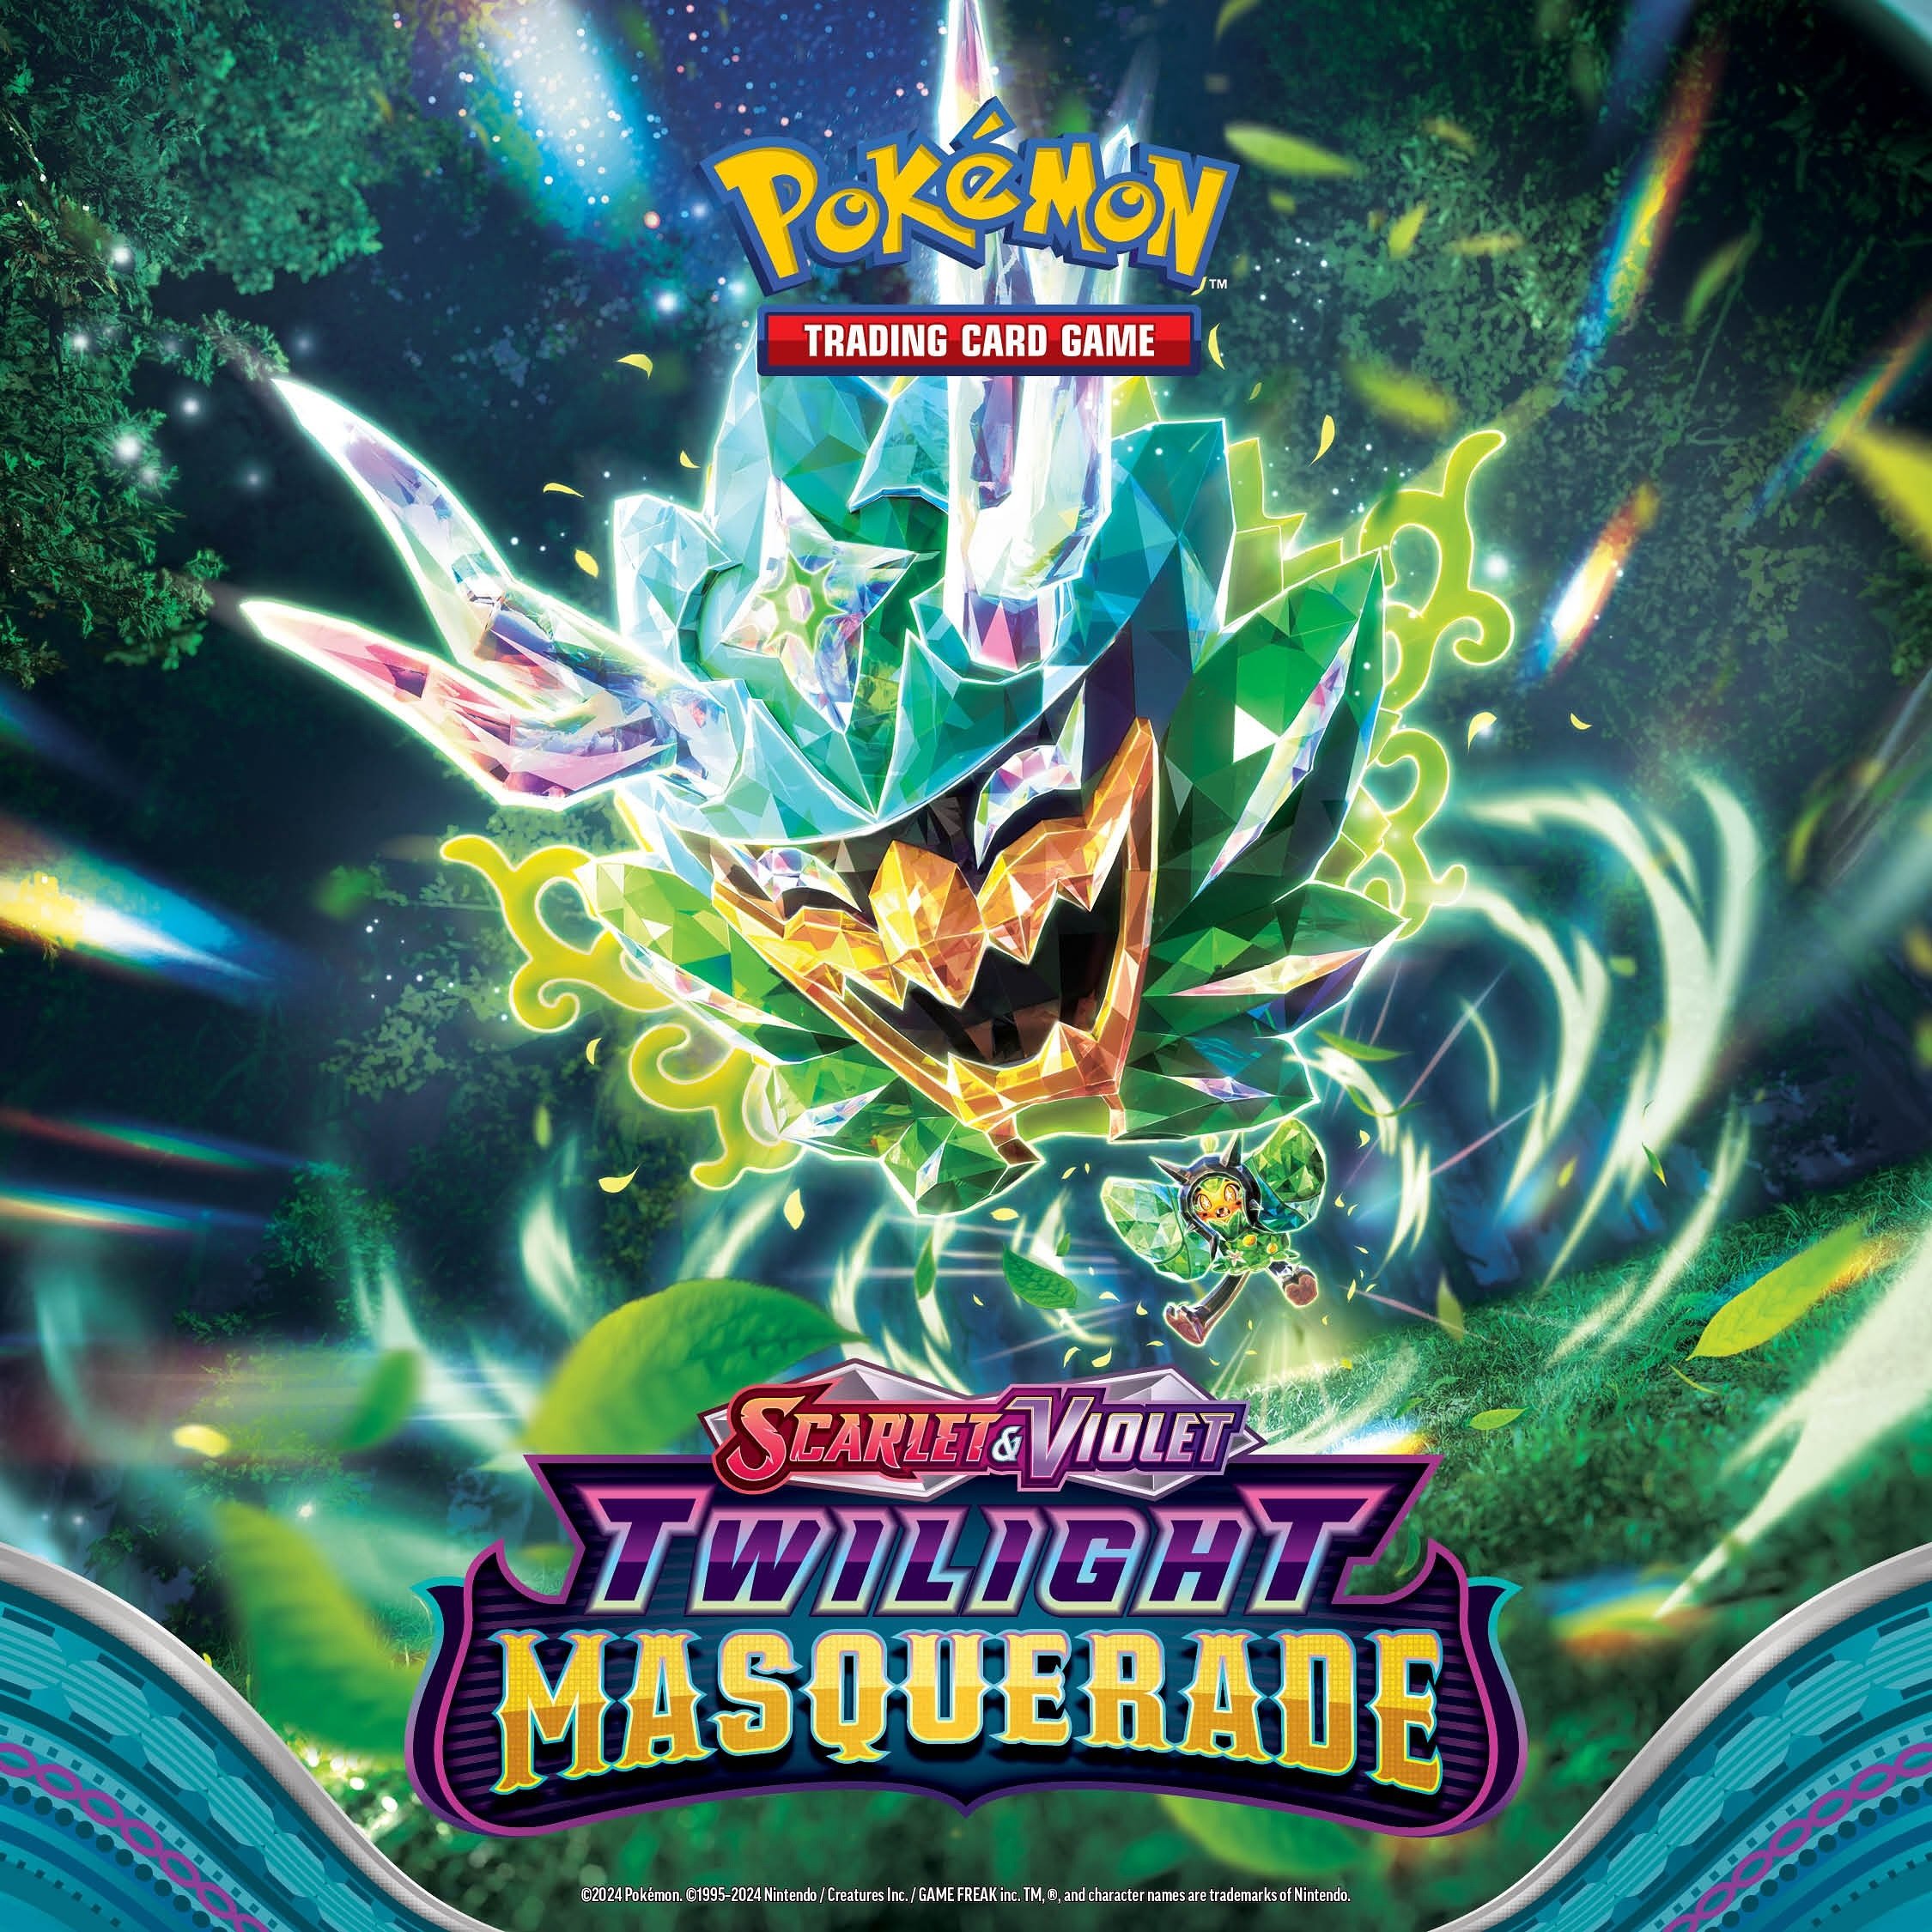 Today we&rsquo;ll start taking pre-registration in-store for our TWO Pok&eacute;mon Twilight Masquerade Pre-Release events!

This event is $25 per player Sunday, 5/12 and 5/19 to get a first look at the newest set to release. Tomorrow (Monday) we&rsq